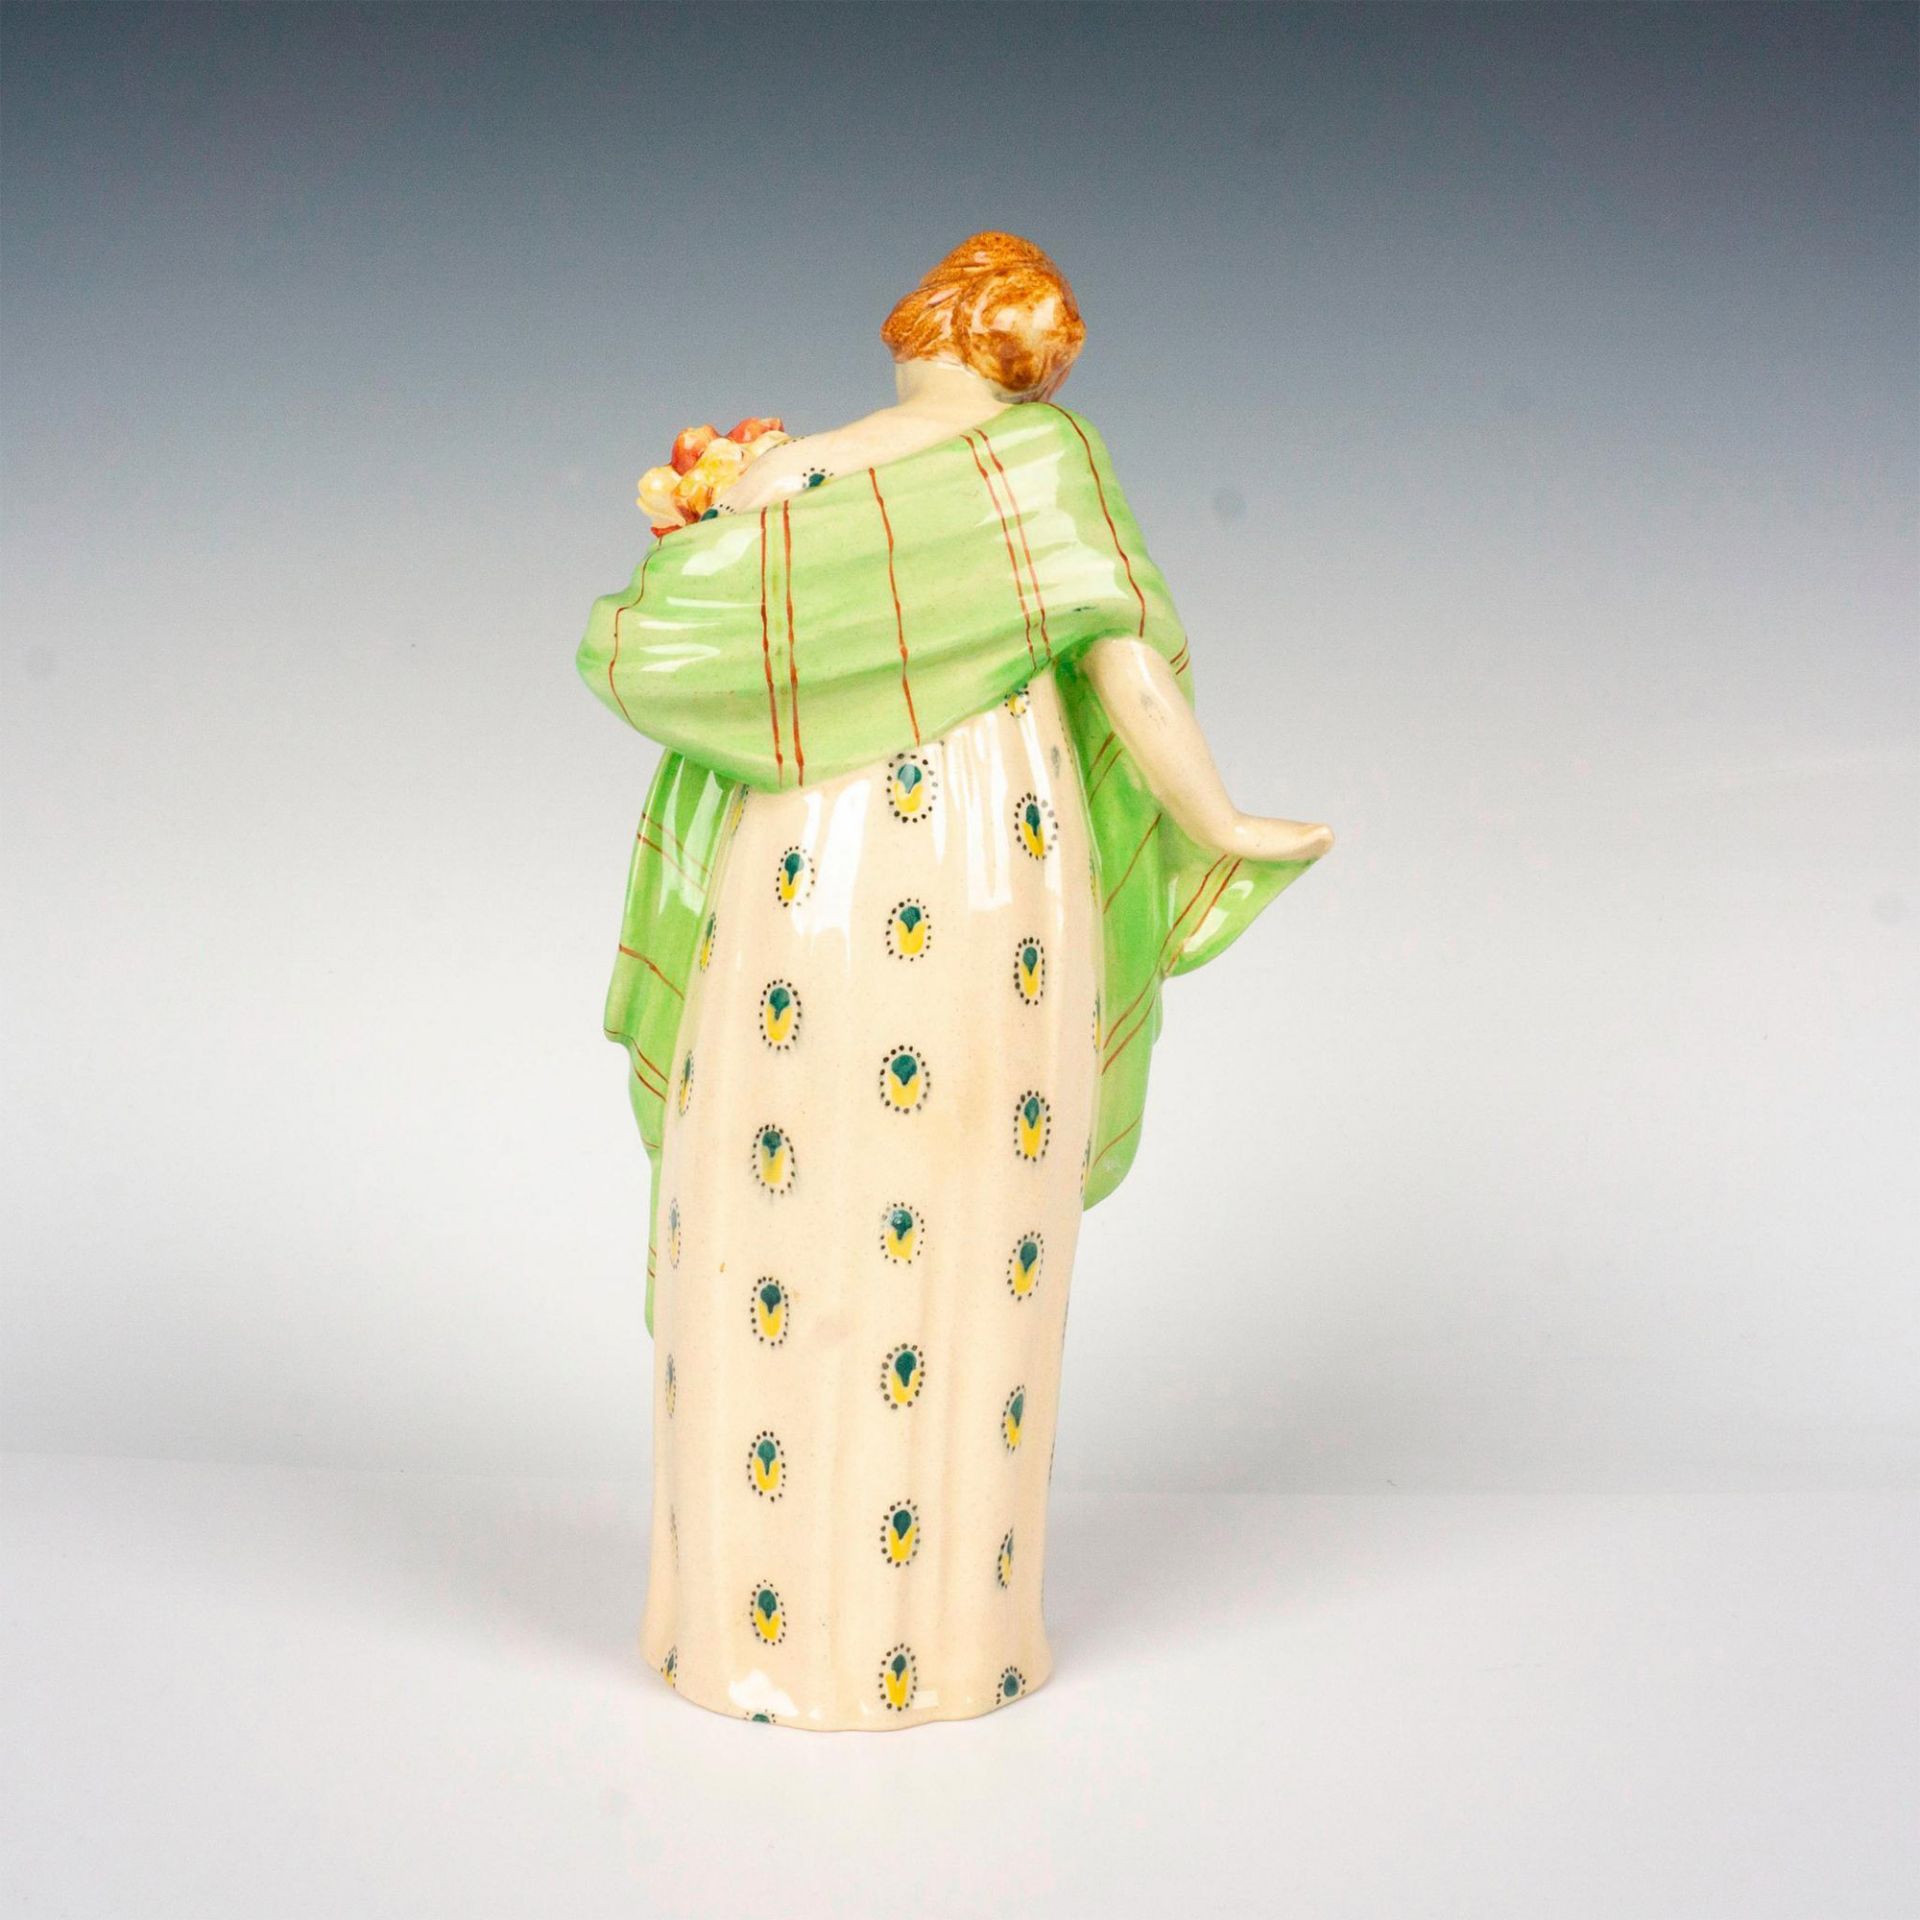 Tulips HN488 Extremely Rare - Royal Doulton Figurine - Image 2 of 3